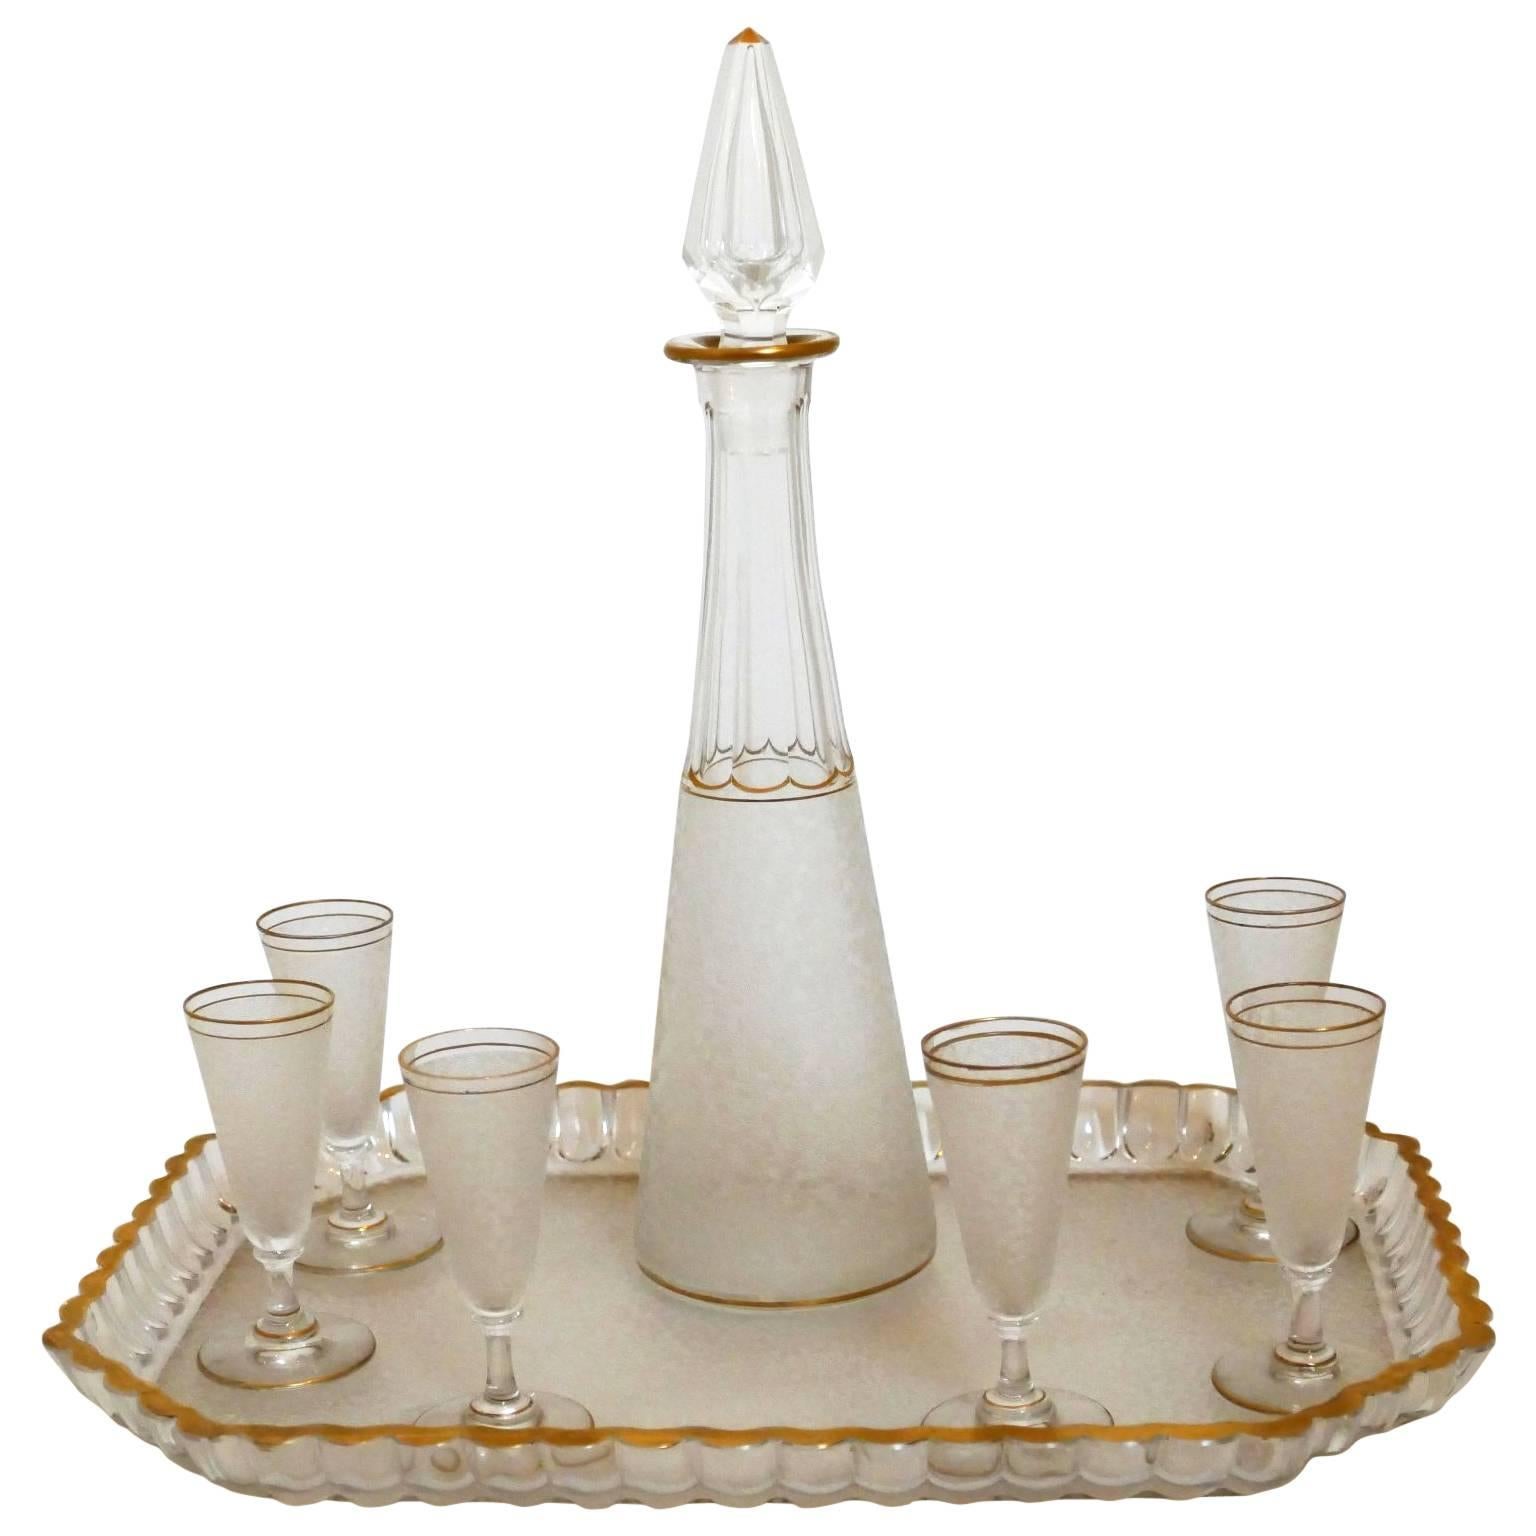 1900s St. Louis Gold Enamel Crystal Liquor Set - Decanter Cordials and Tray For Sale